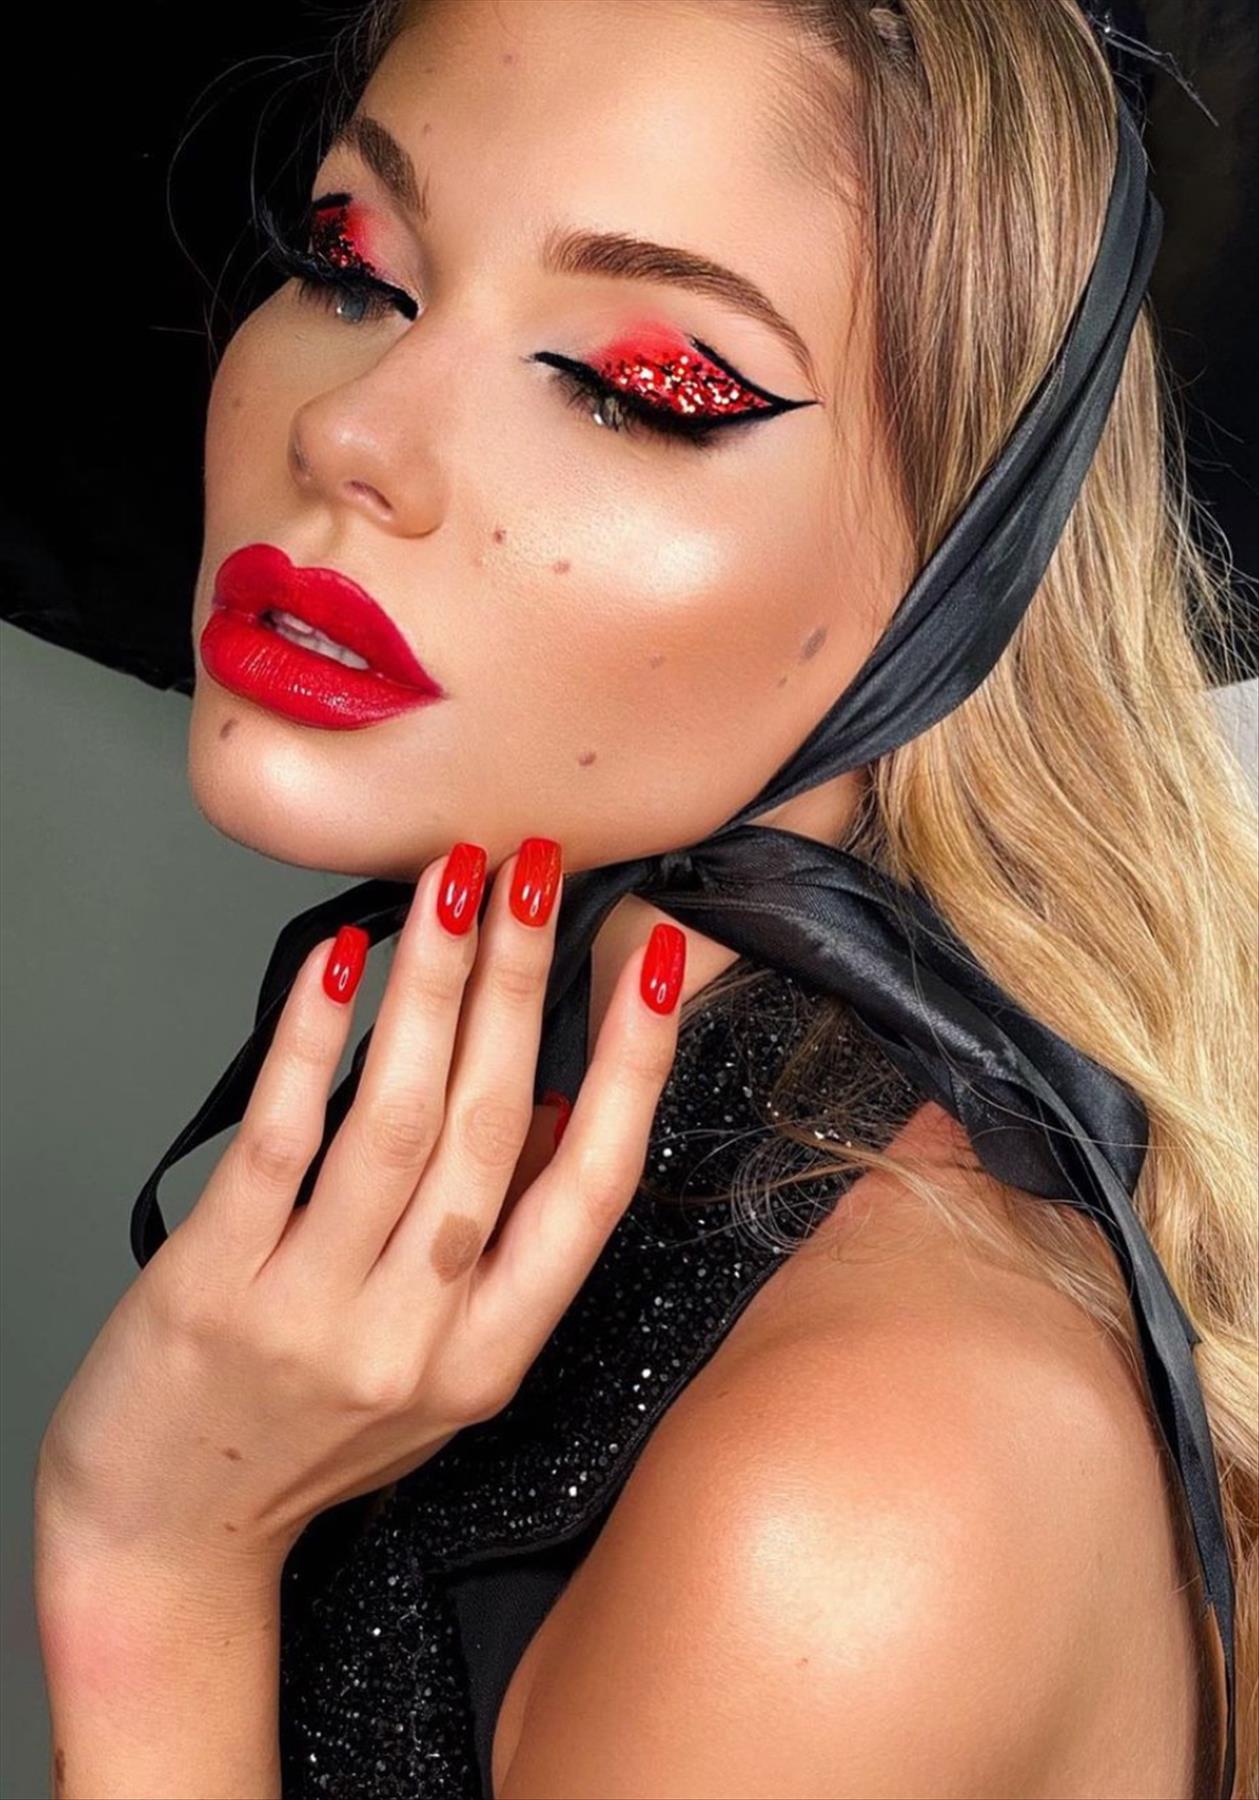 Classic Red Lip Makeup Looks to Wear on Valentine's Day